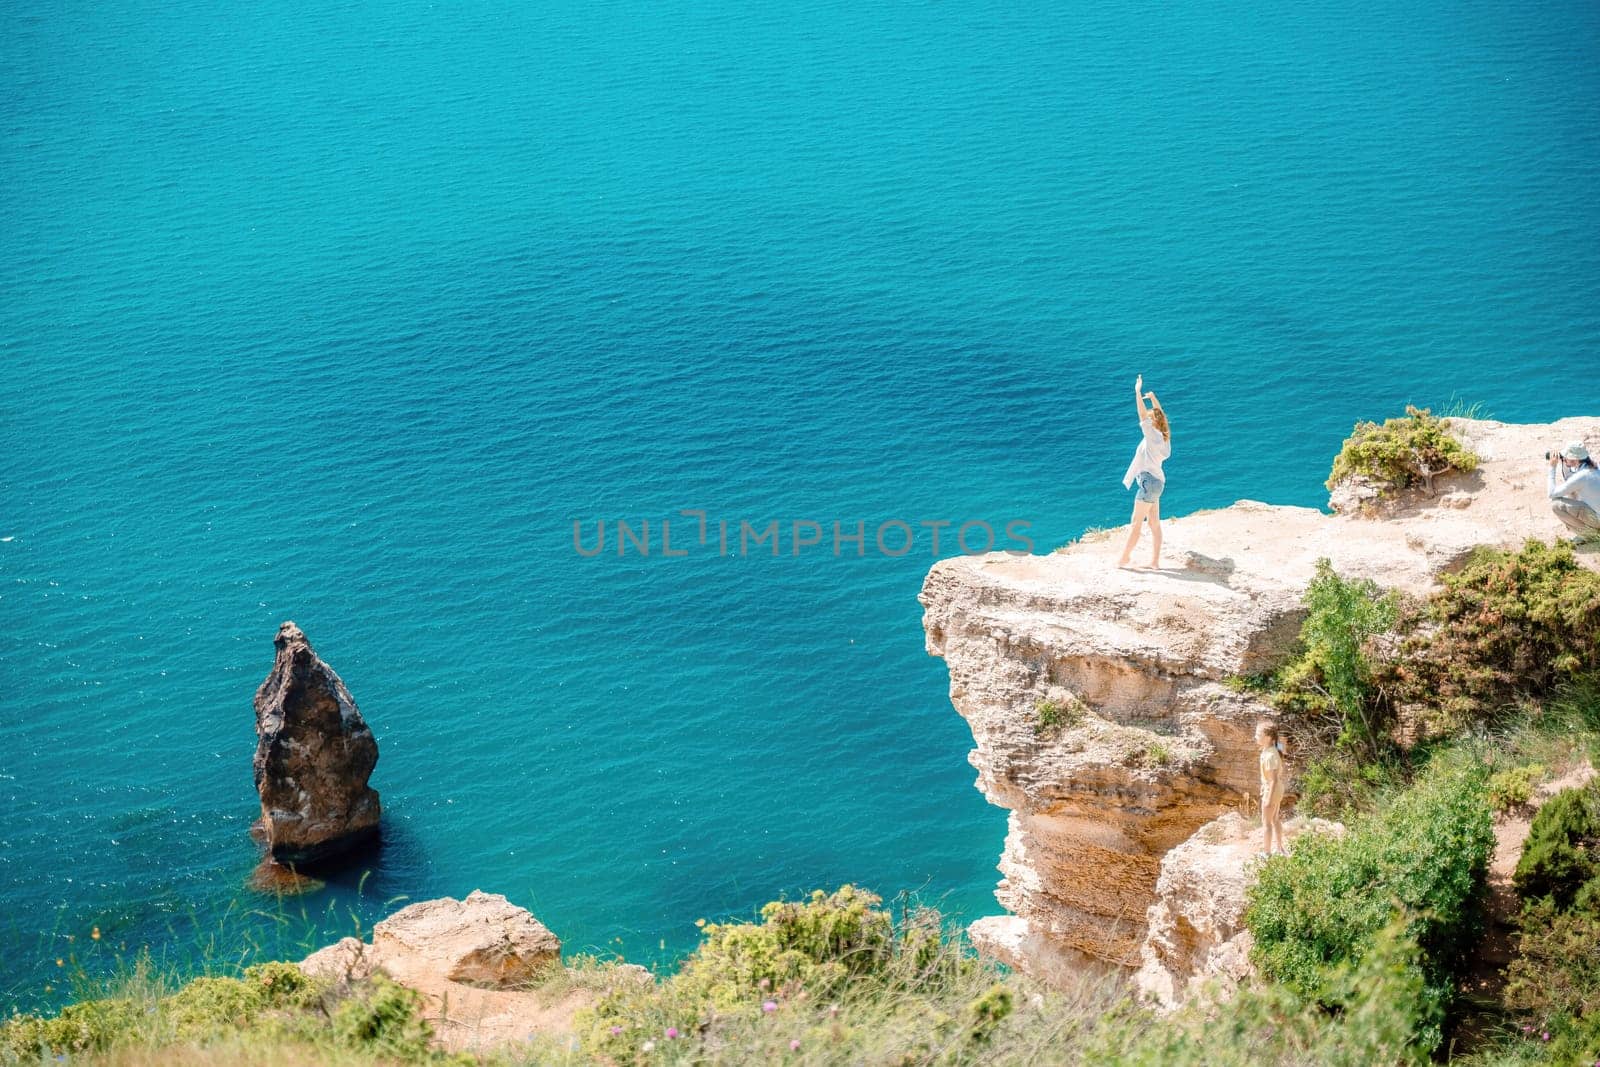 A woman stands on a cliff overlooking the ocean. The water is blue and the sky is clear. by Matiunina